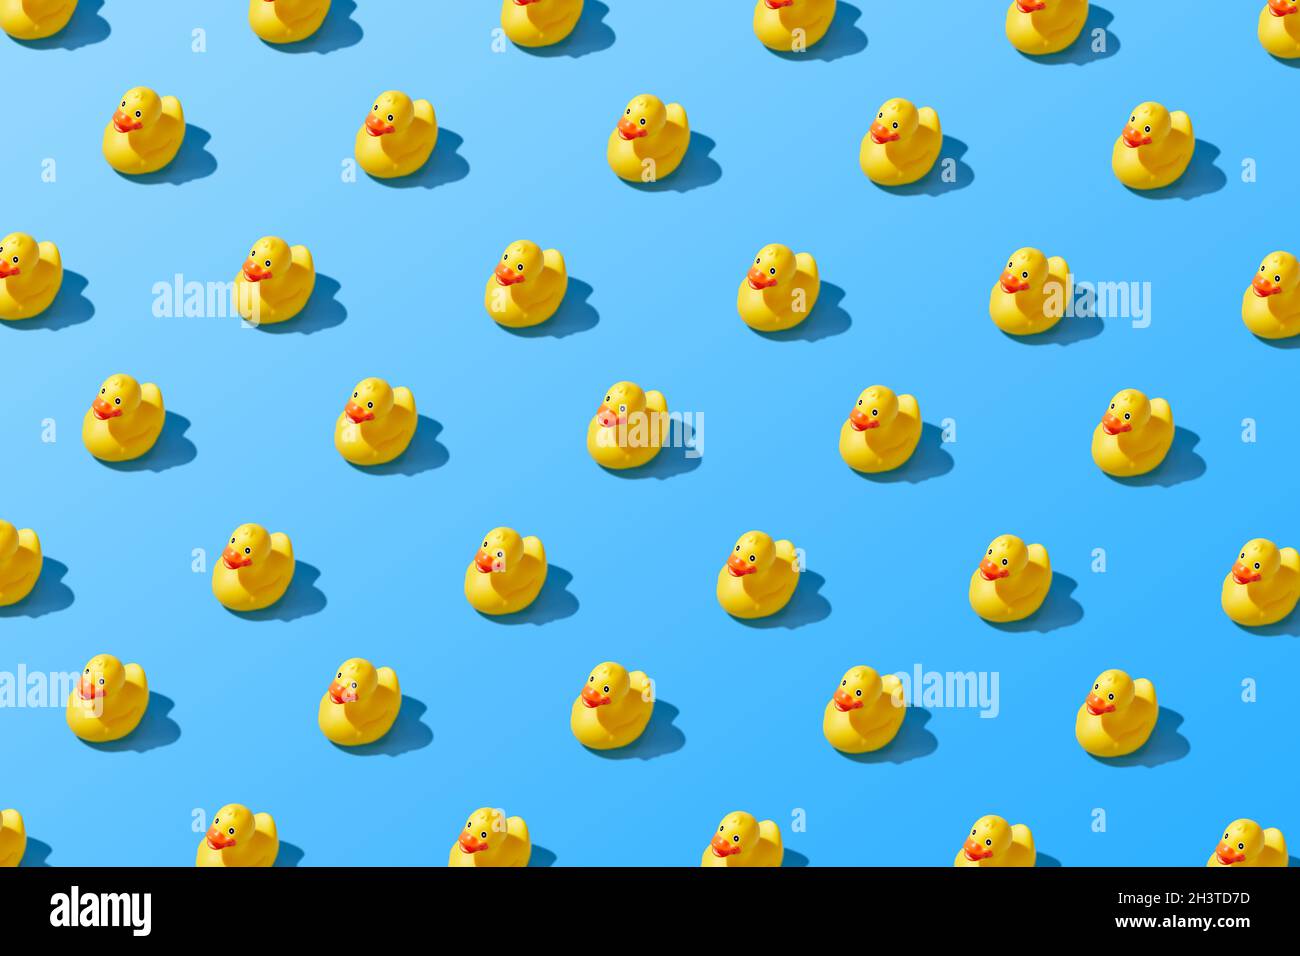 Flat lay of a creative summer yellow rubber duck pattern Stock Photo